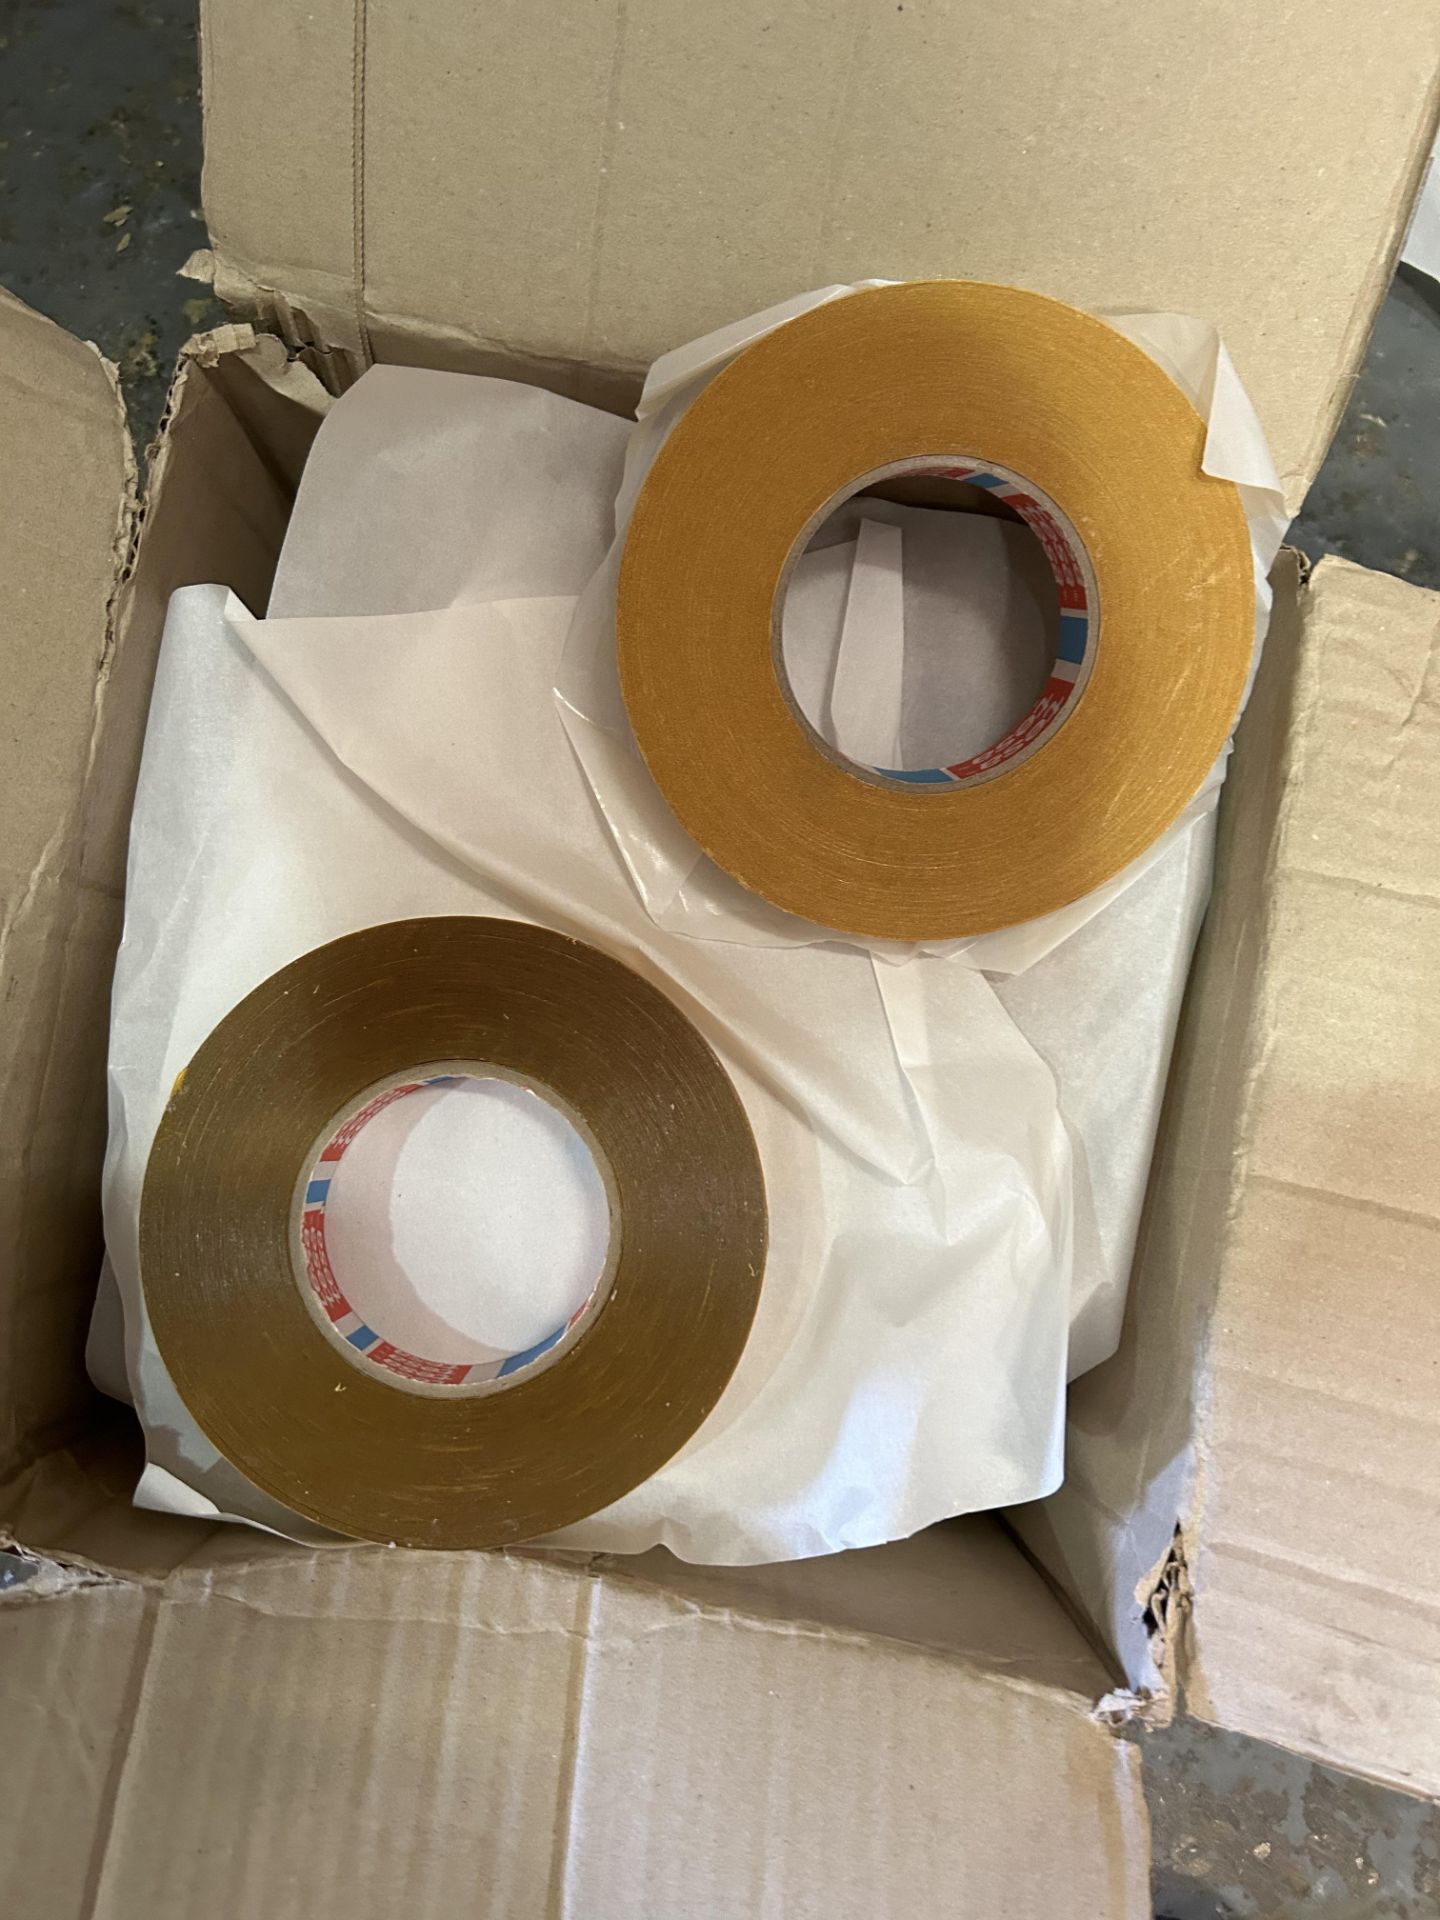 12X TESA 51970 DOUBLE SIDED 25mm x 50m STICKING TAPE - RRP £180